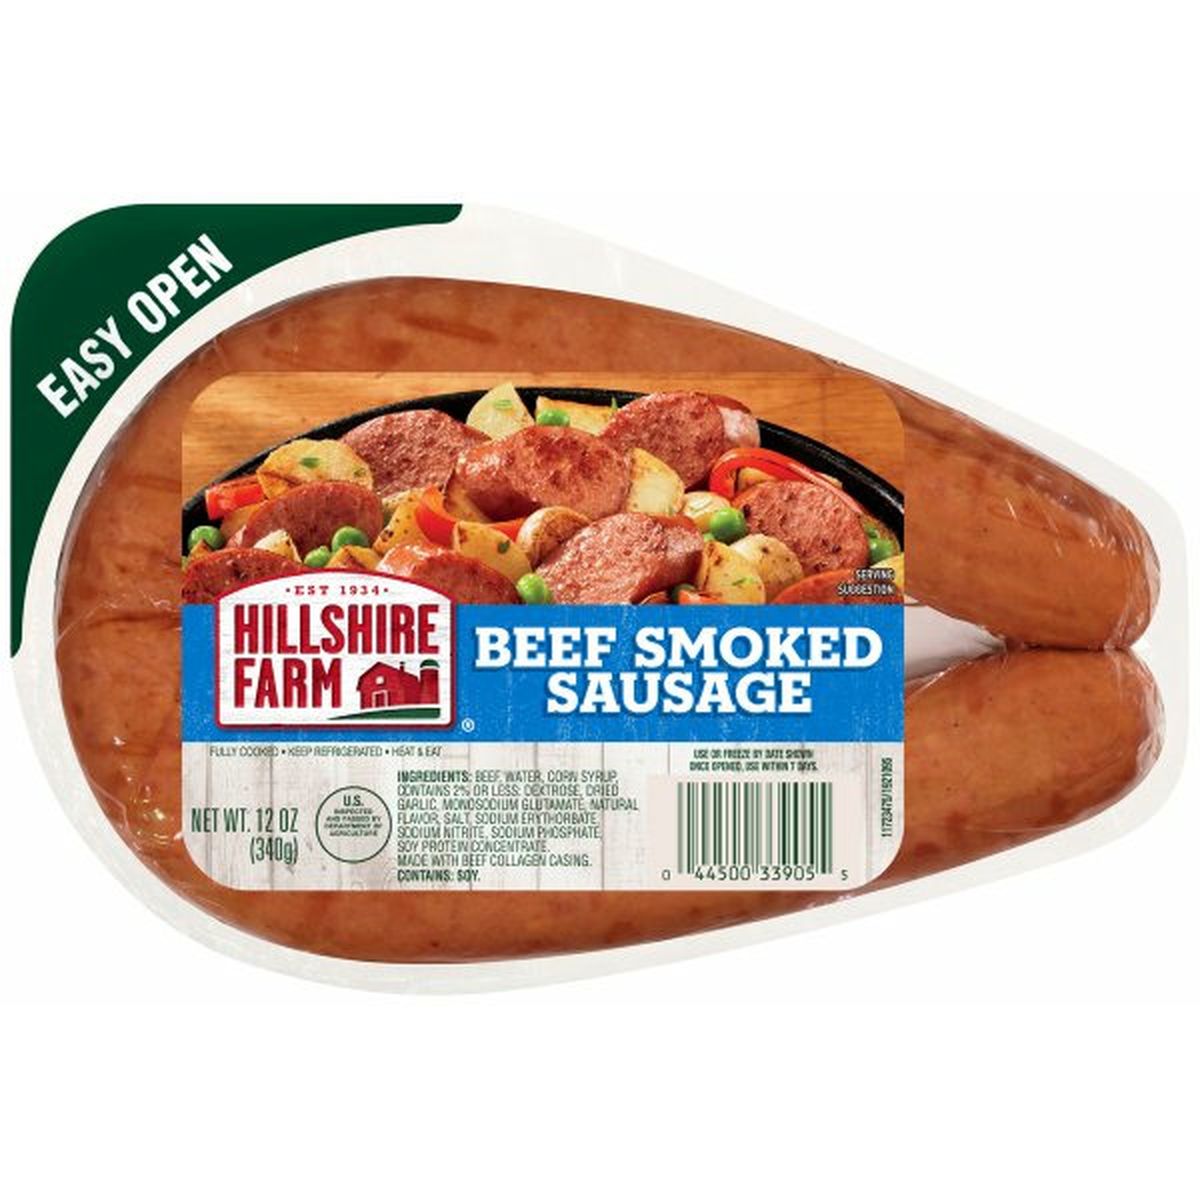 Calories in Hillshire Farm Beef Smoked Sausage